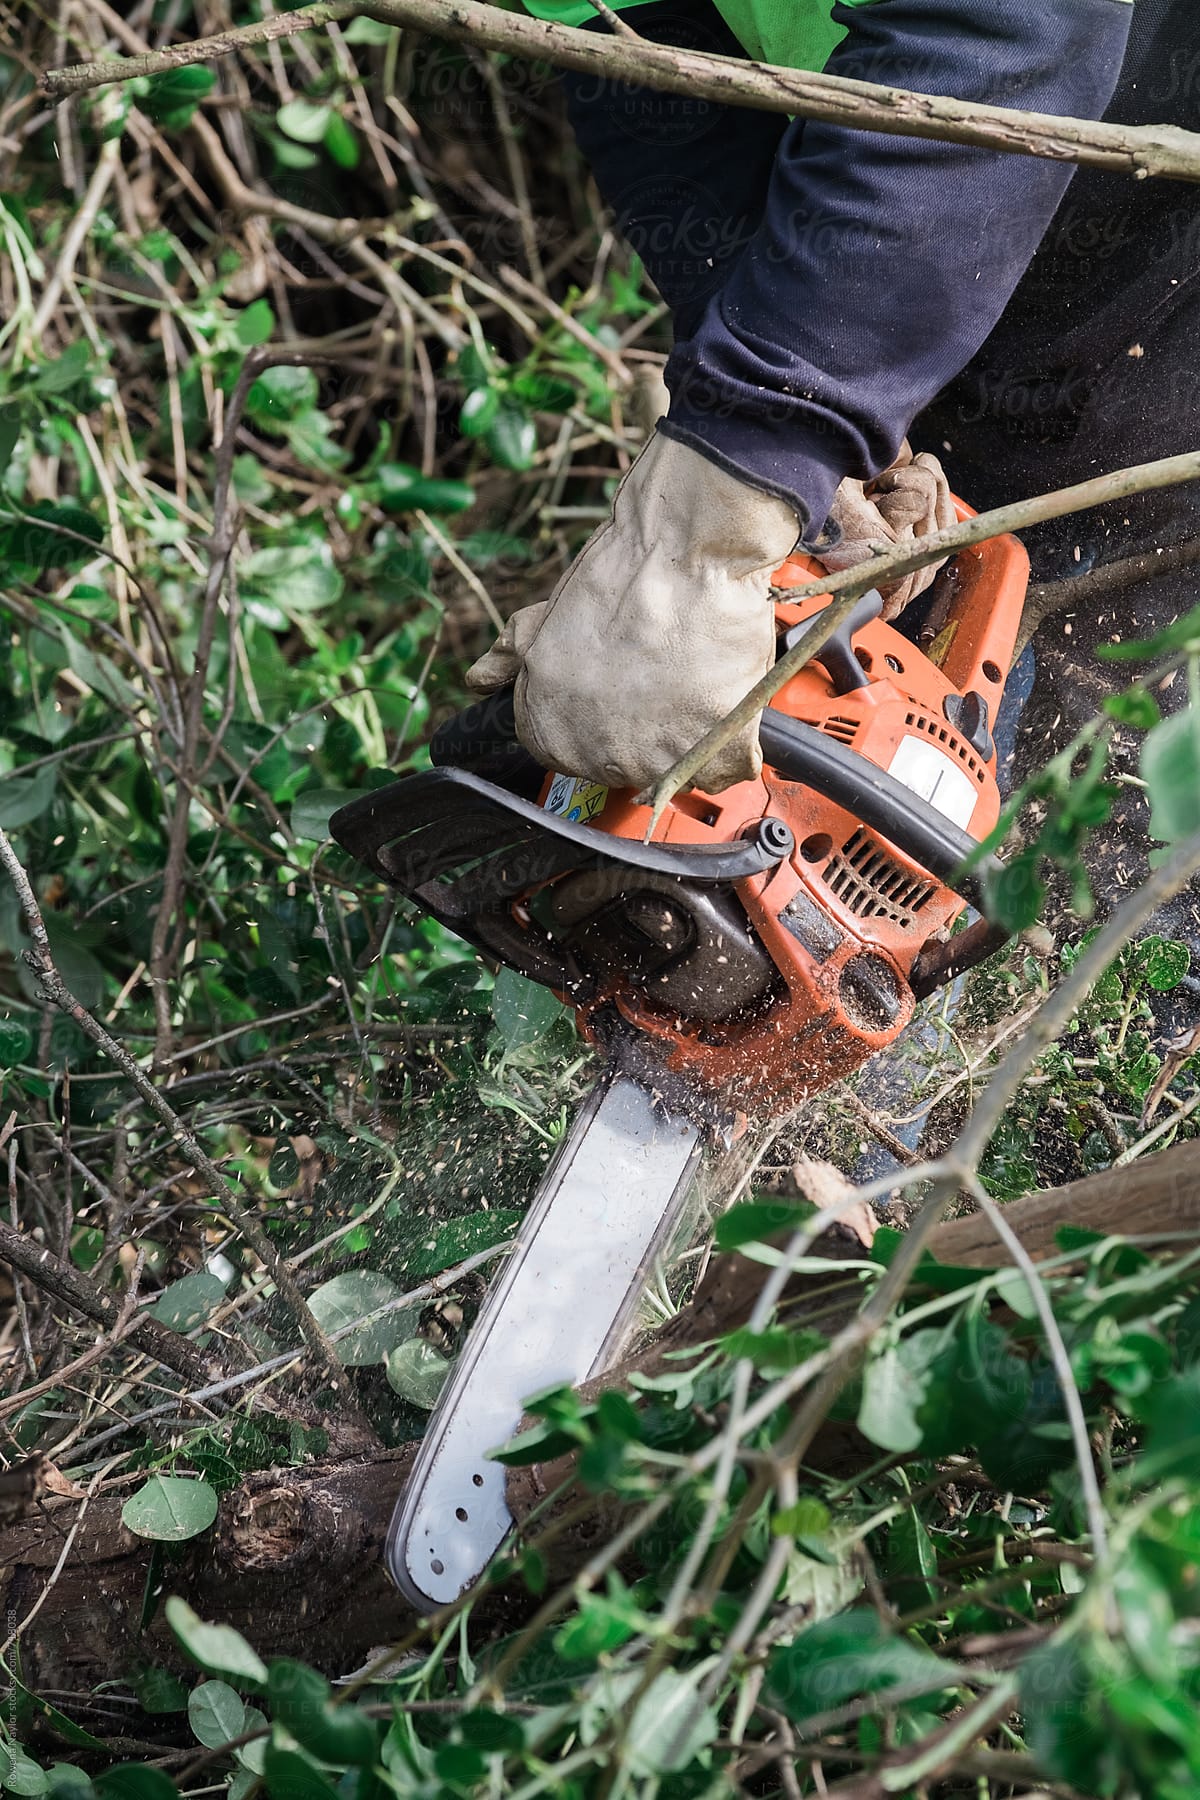 Chainsaw in use cutting tree branches